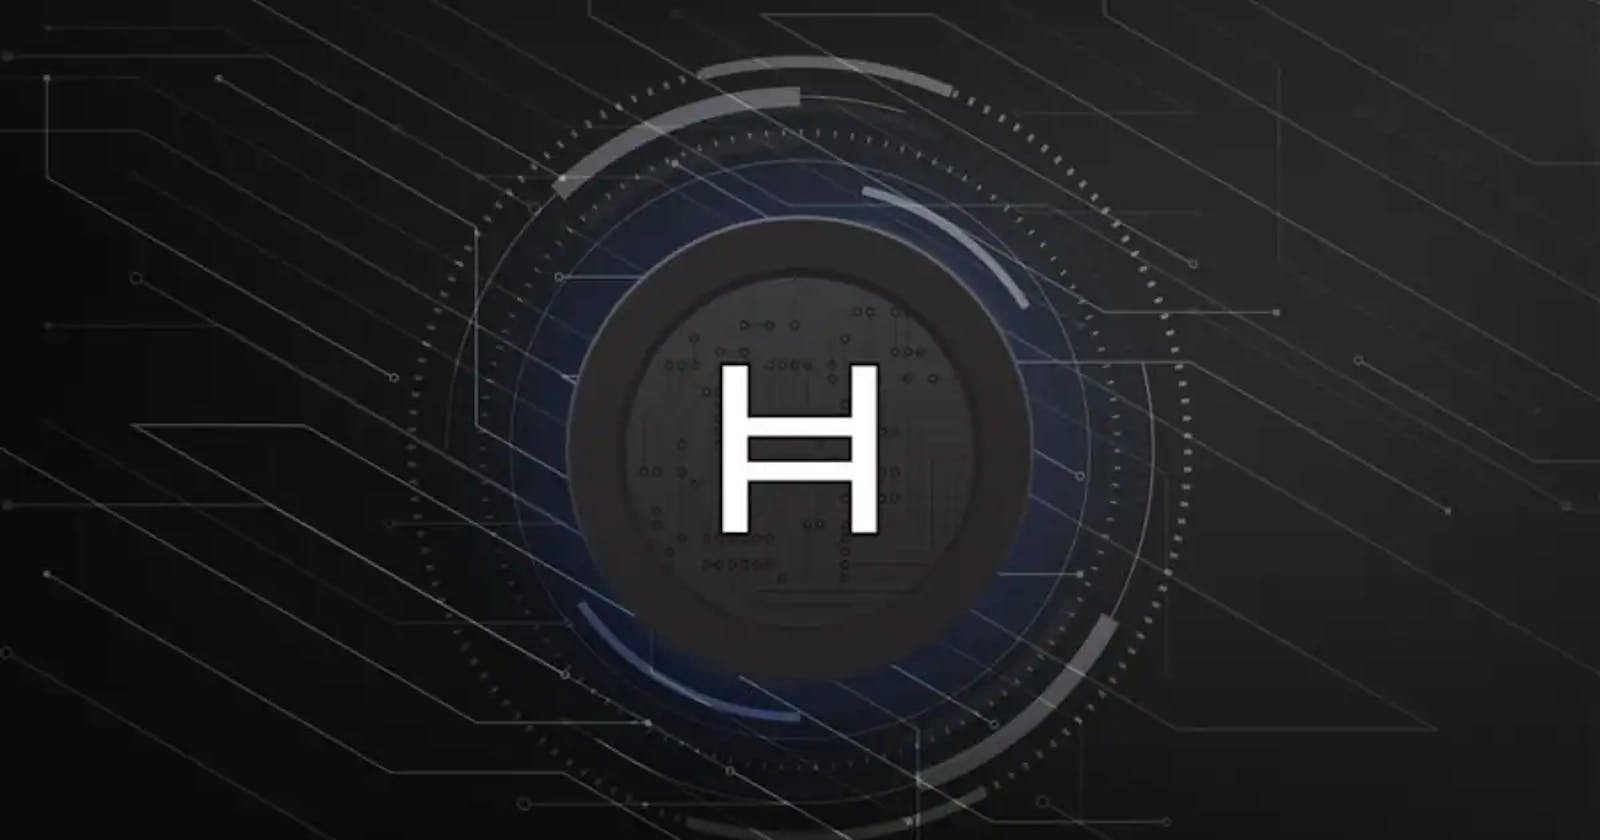 Hedera Hashgraph: The journey begins